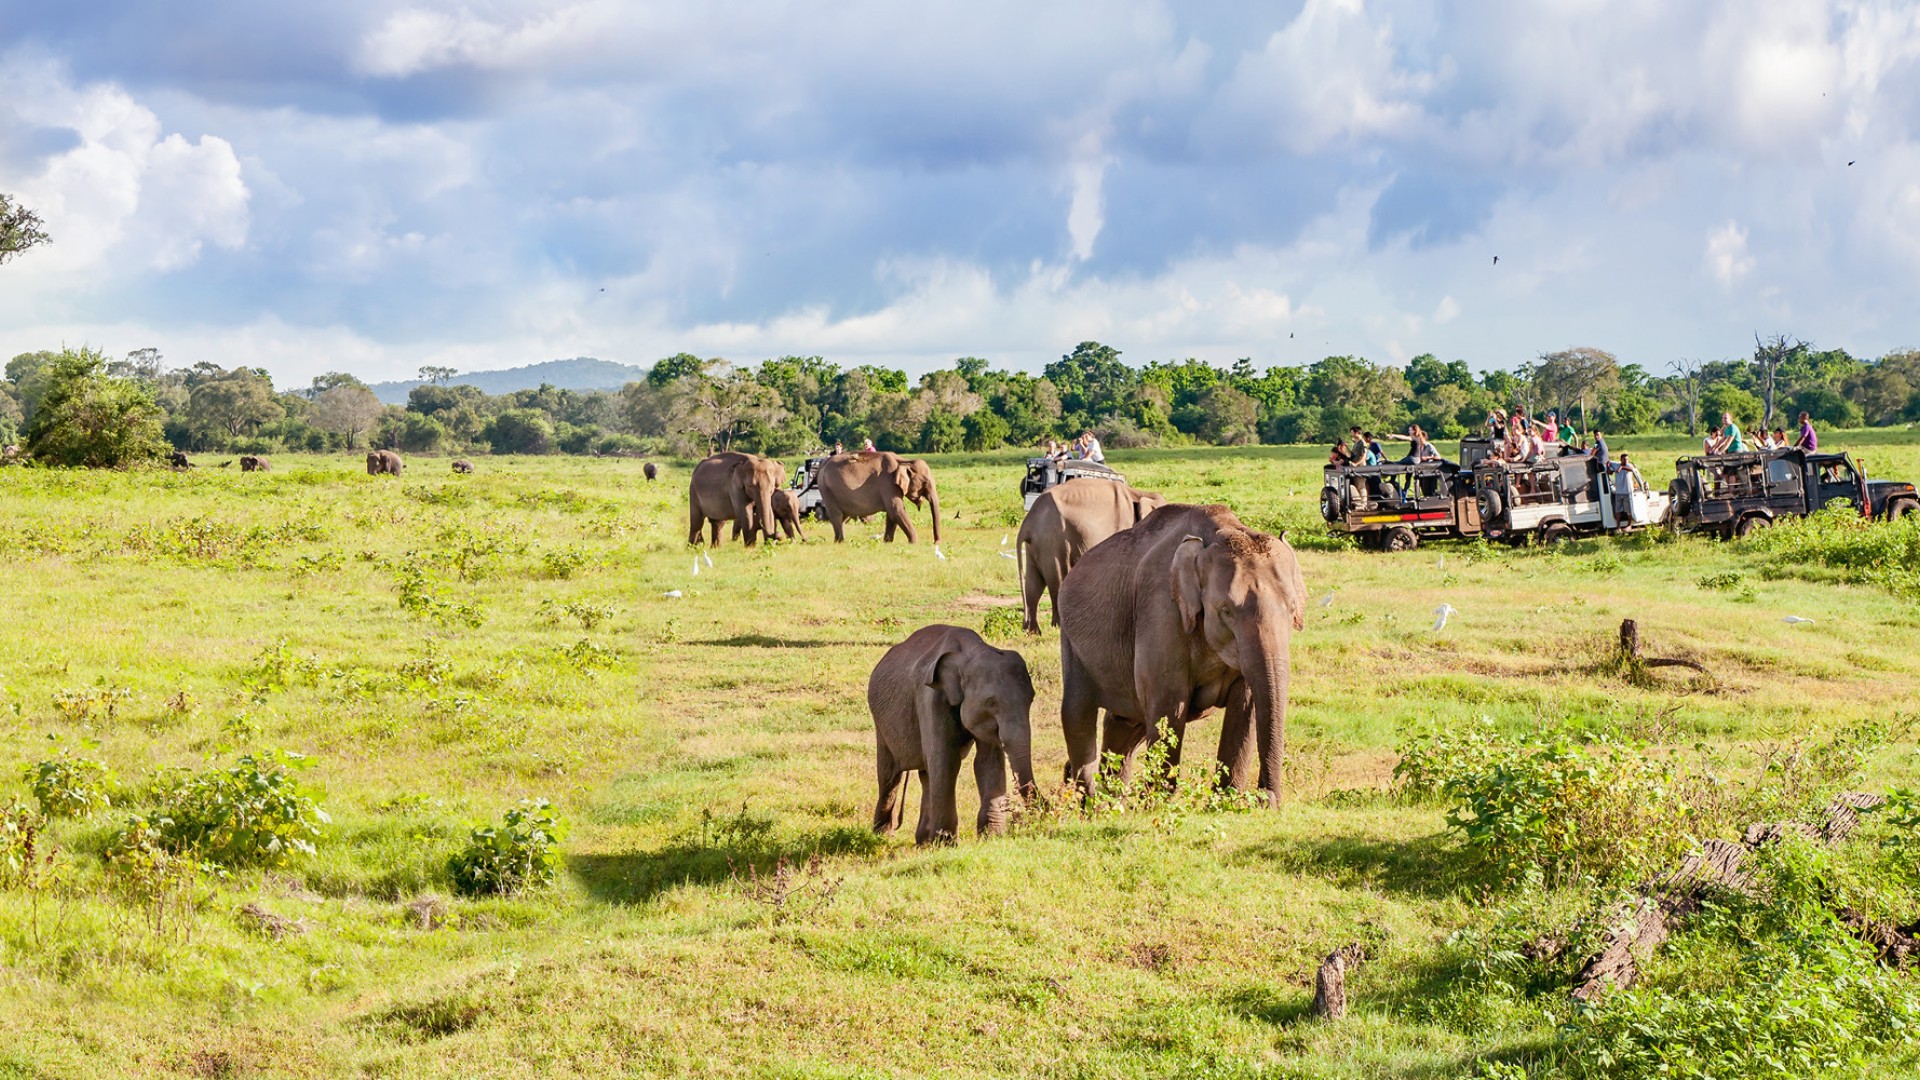 A group of elephants roaming a green field as seen on safari in South Africa